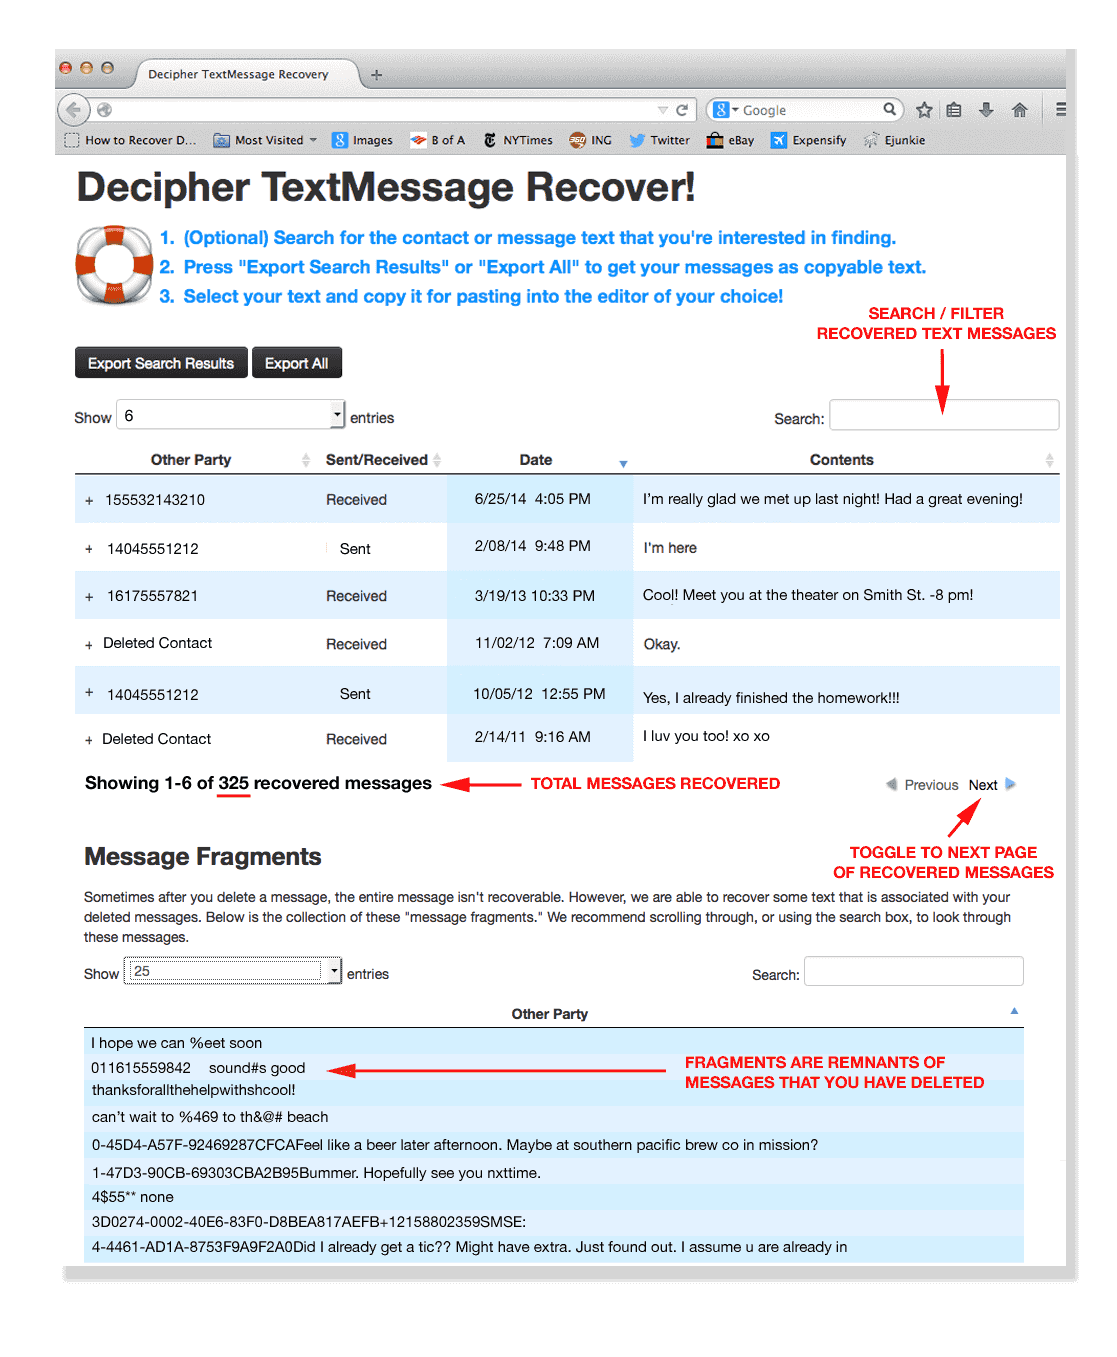 The recover text message screen in Decipher TextMessage helps you find messages you previously erased.